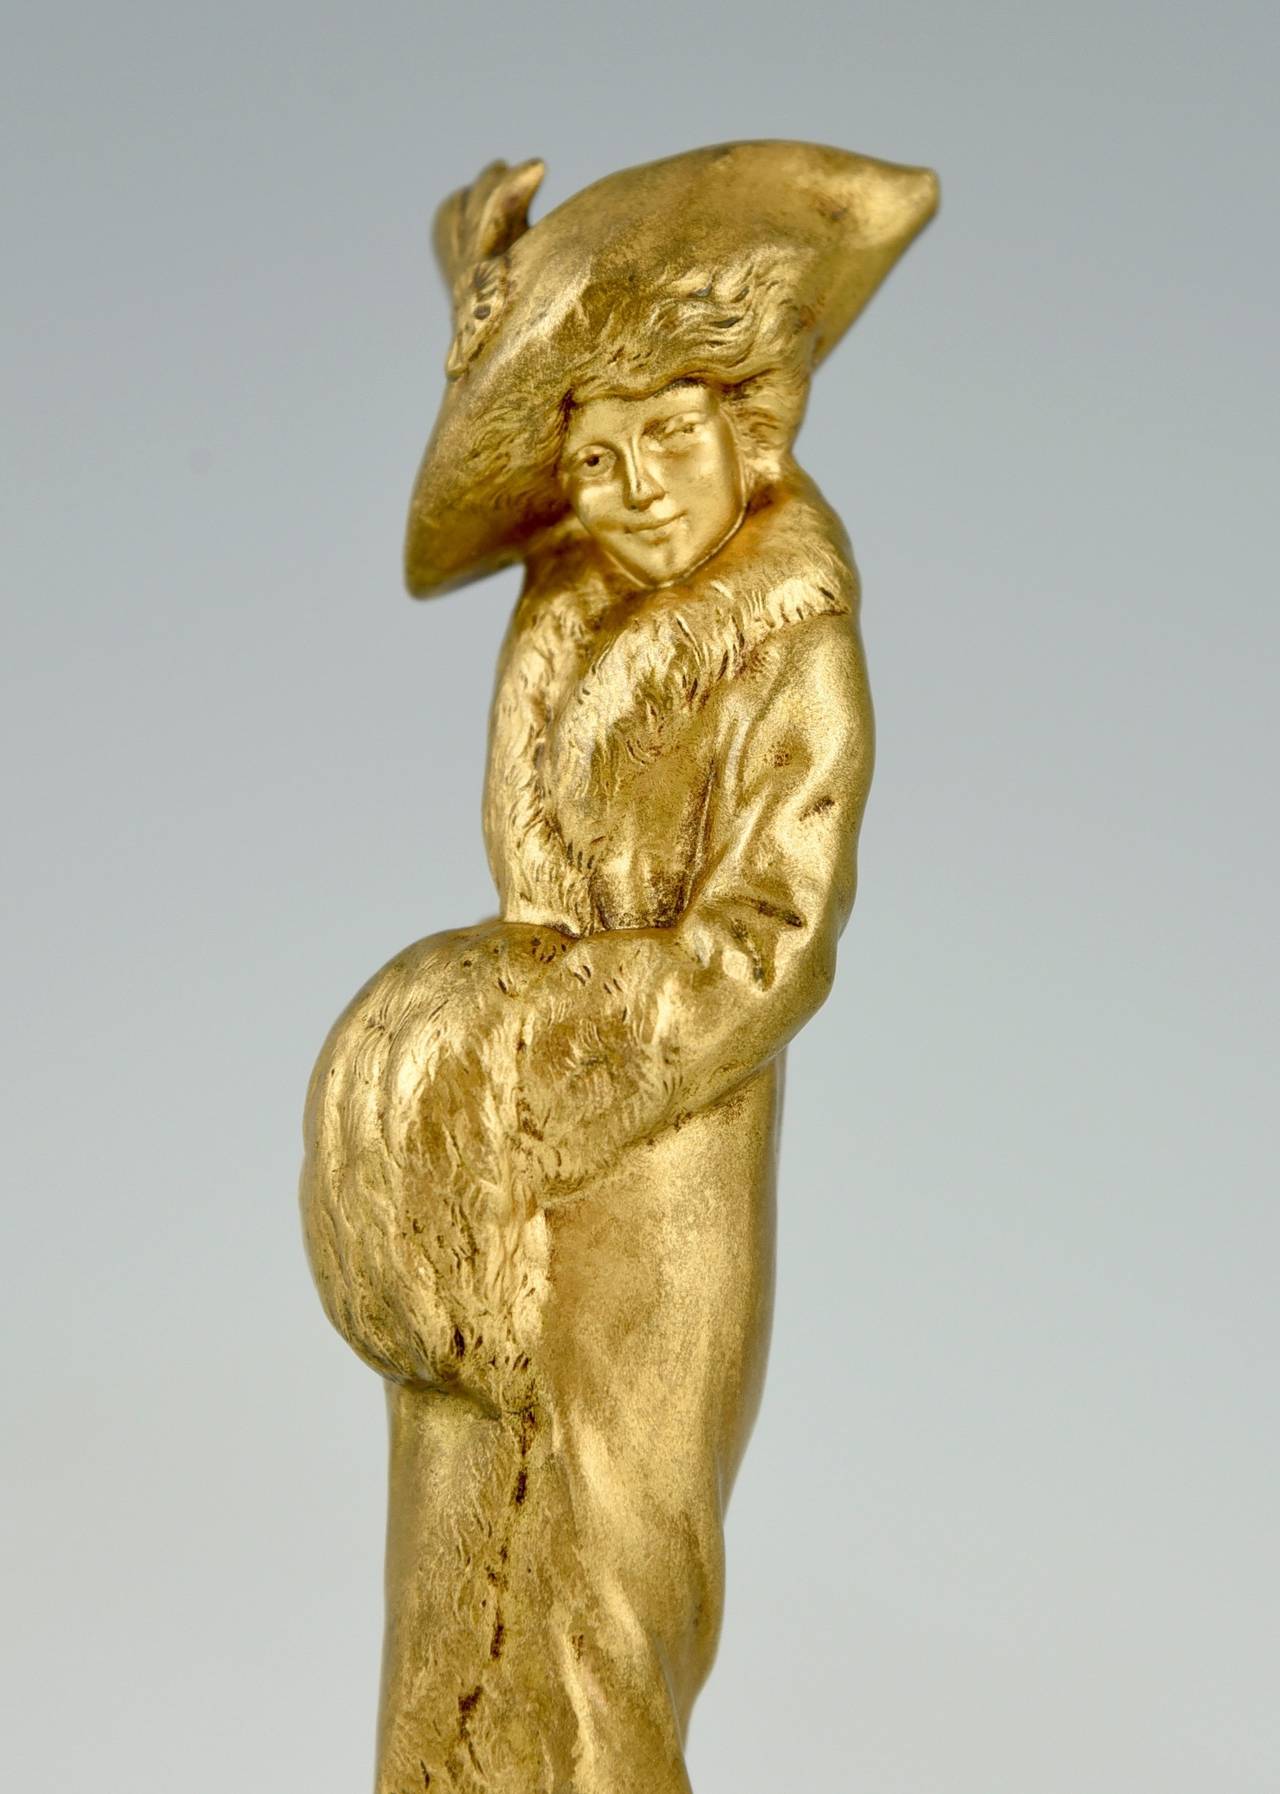 20th Century French Art Deco Bronze Sculpture of a Lady by Guiraud Riviere, 1925